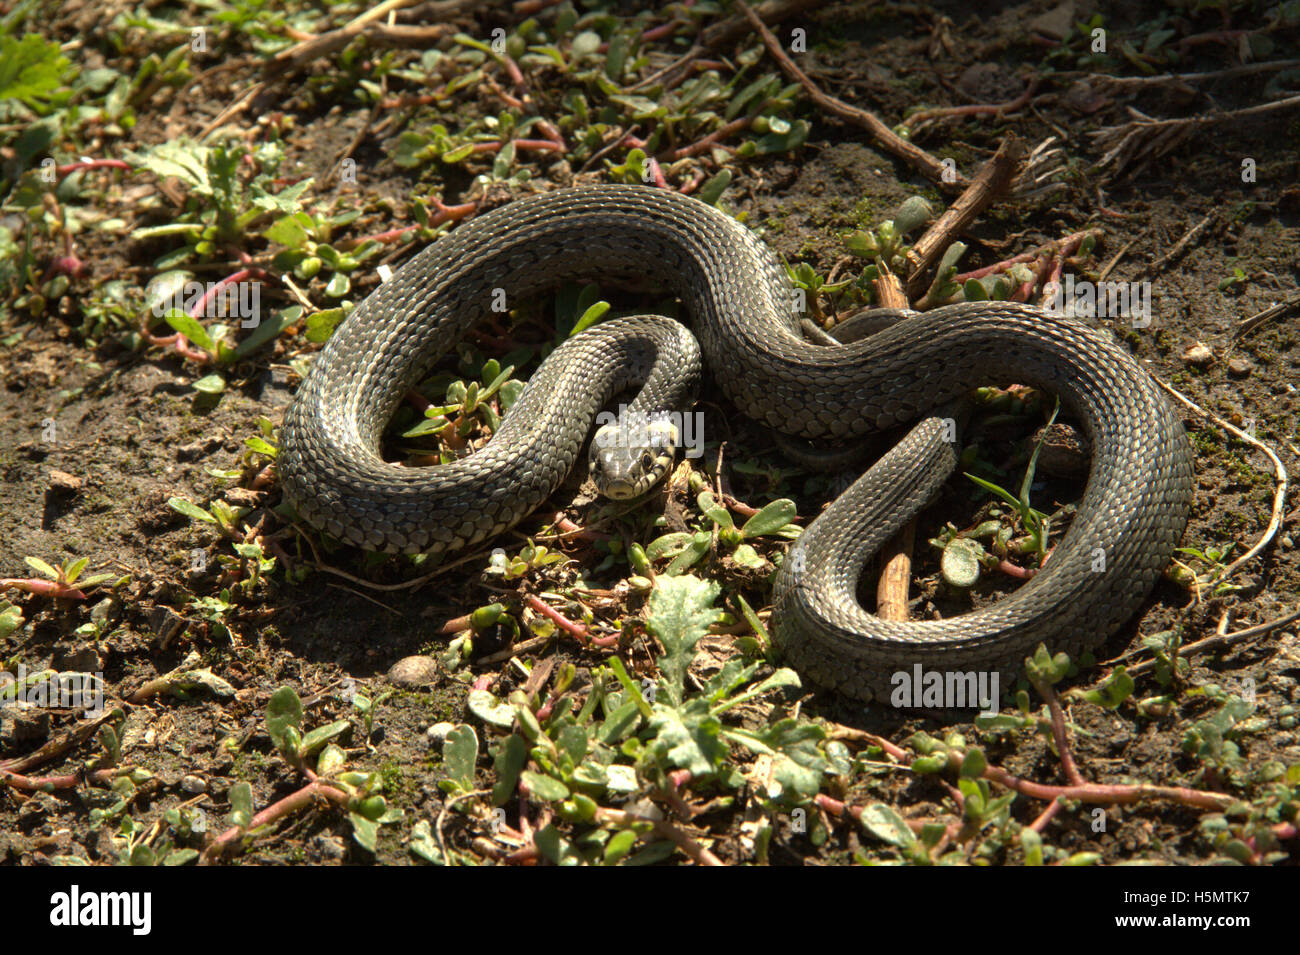 Coiled snake basking in the sun Stock Photo